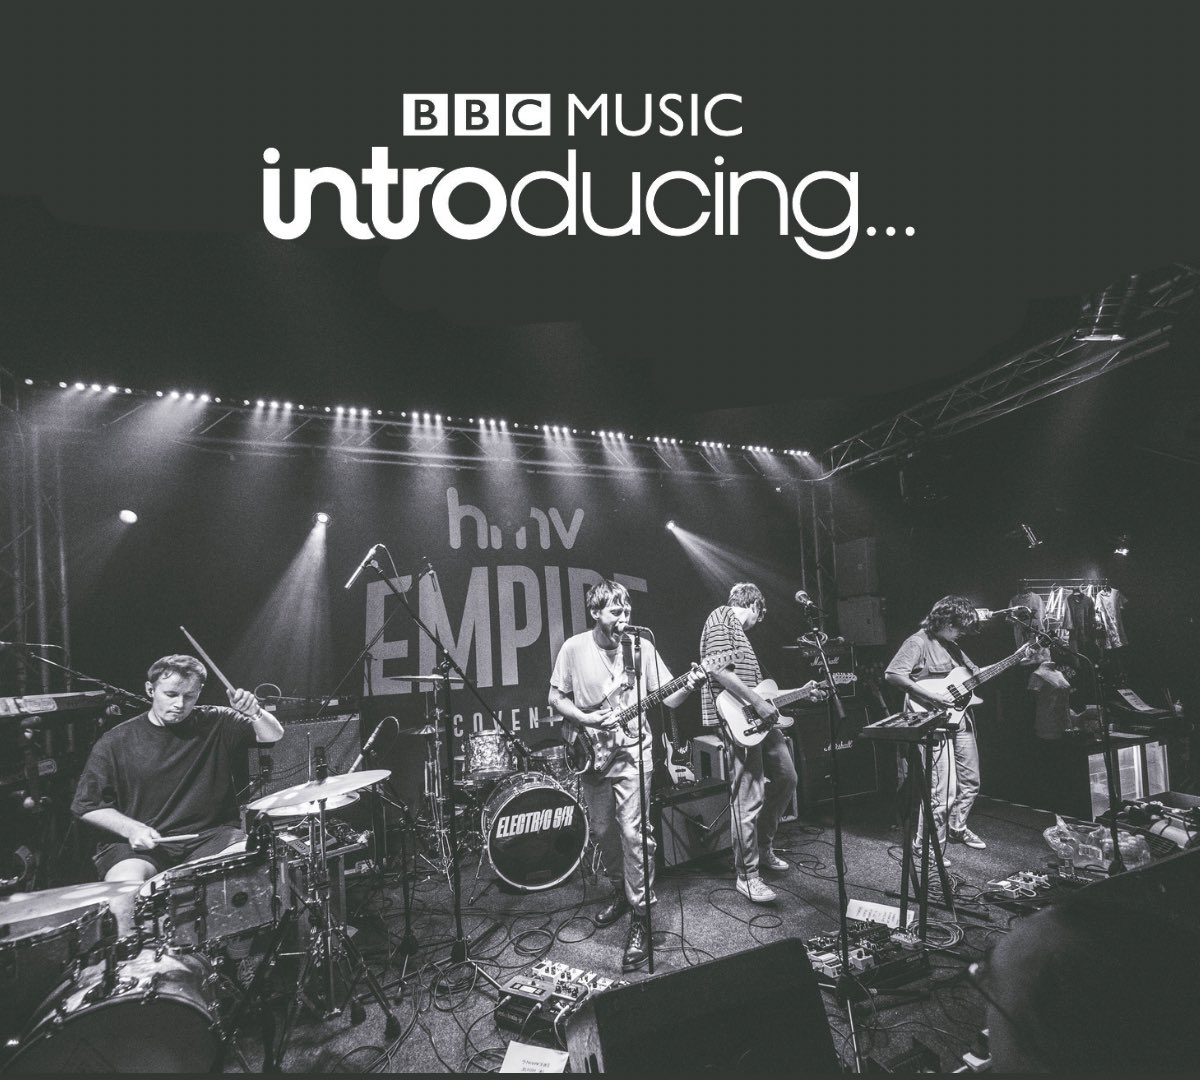 Thanks for all the support for ‘Simple Pleasures’ so far! Tonight it’s getting a spin on @bbcintroducing courtesy of @KerrieCosh 🥳 Give it a listen and let us know what you think! ❤️